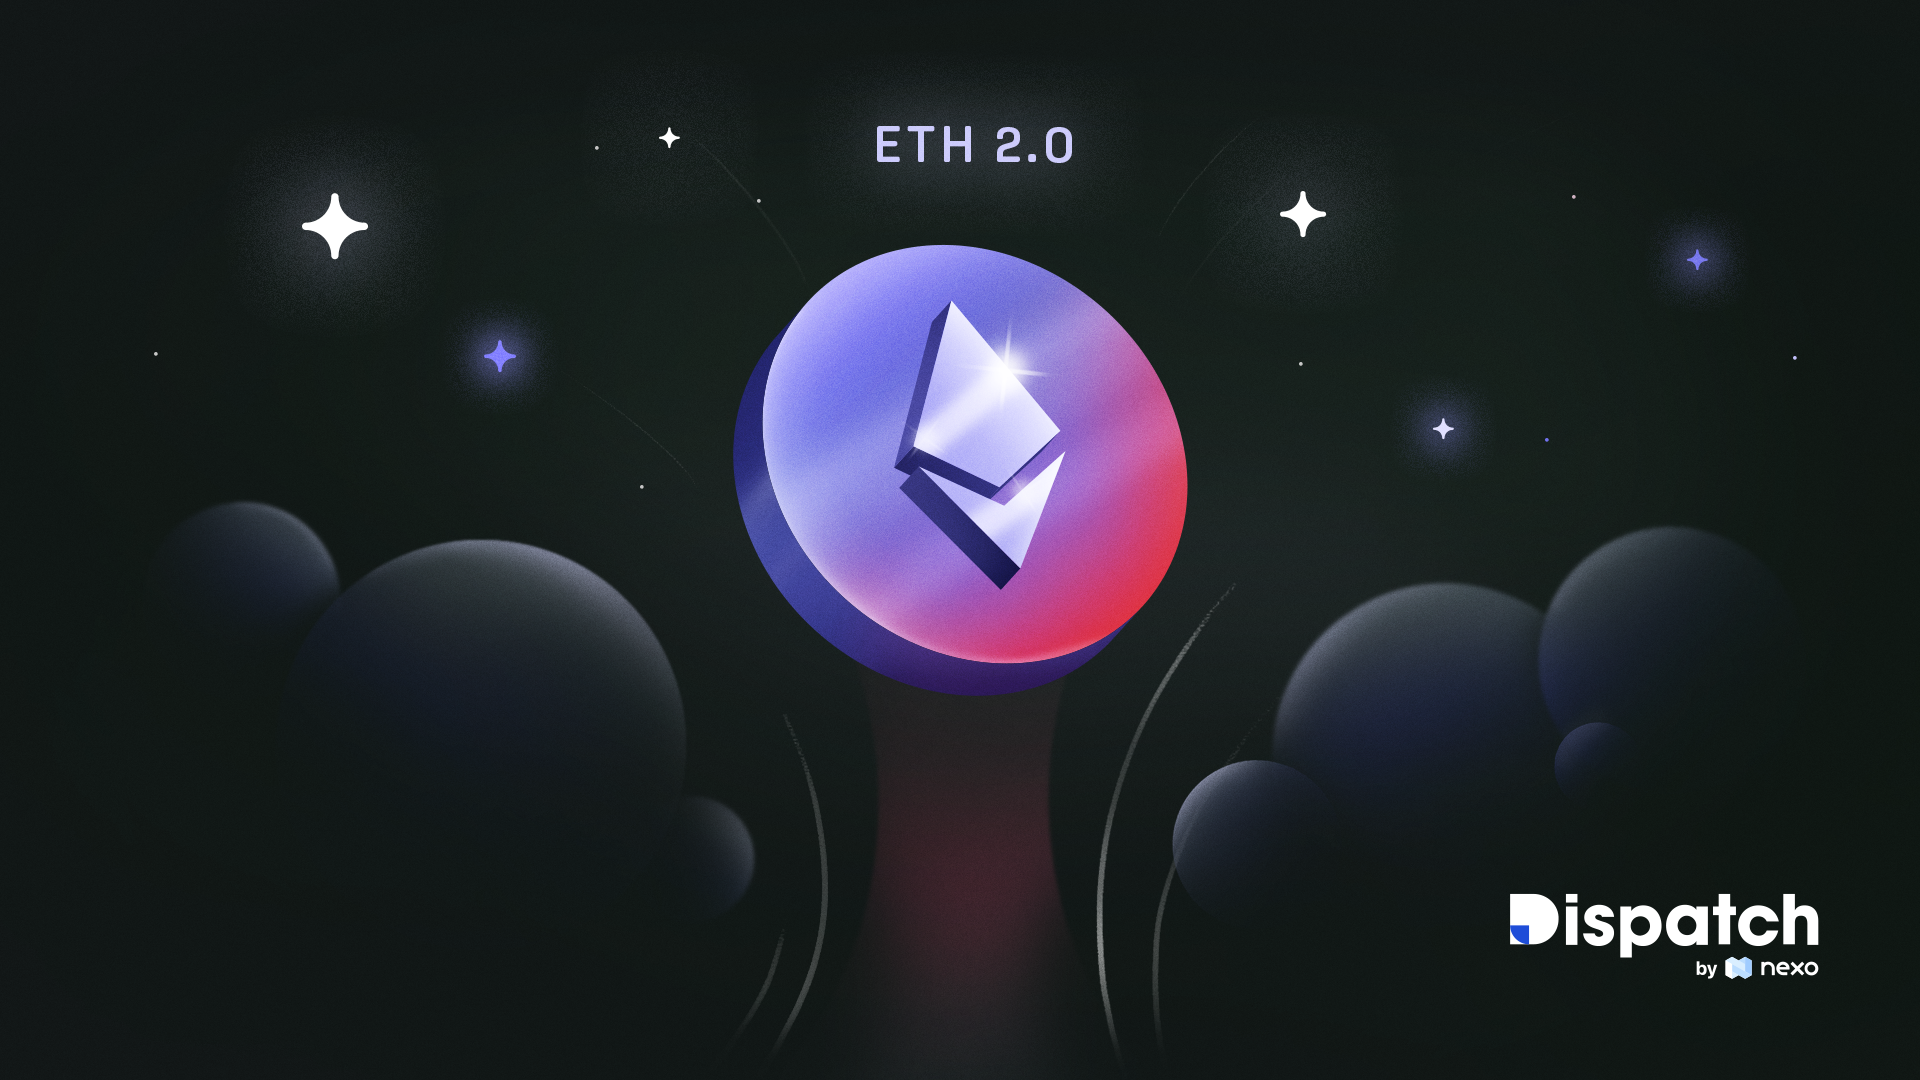 Dispatch #12: ETH 2.0 Is Real